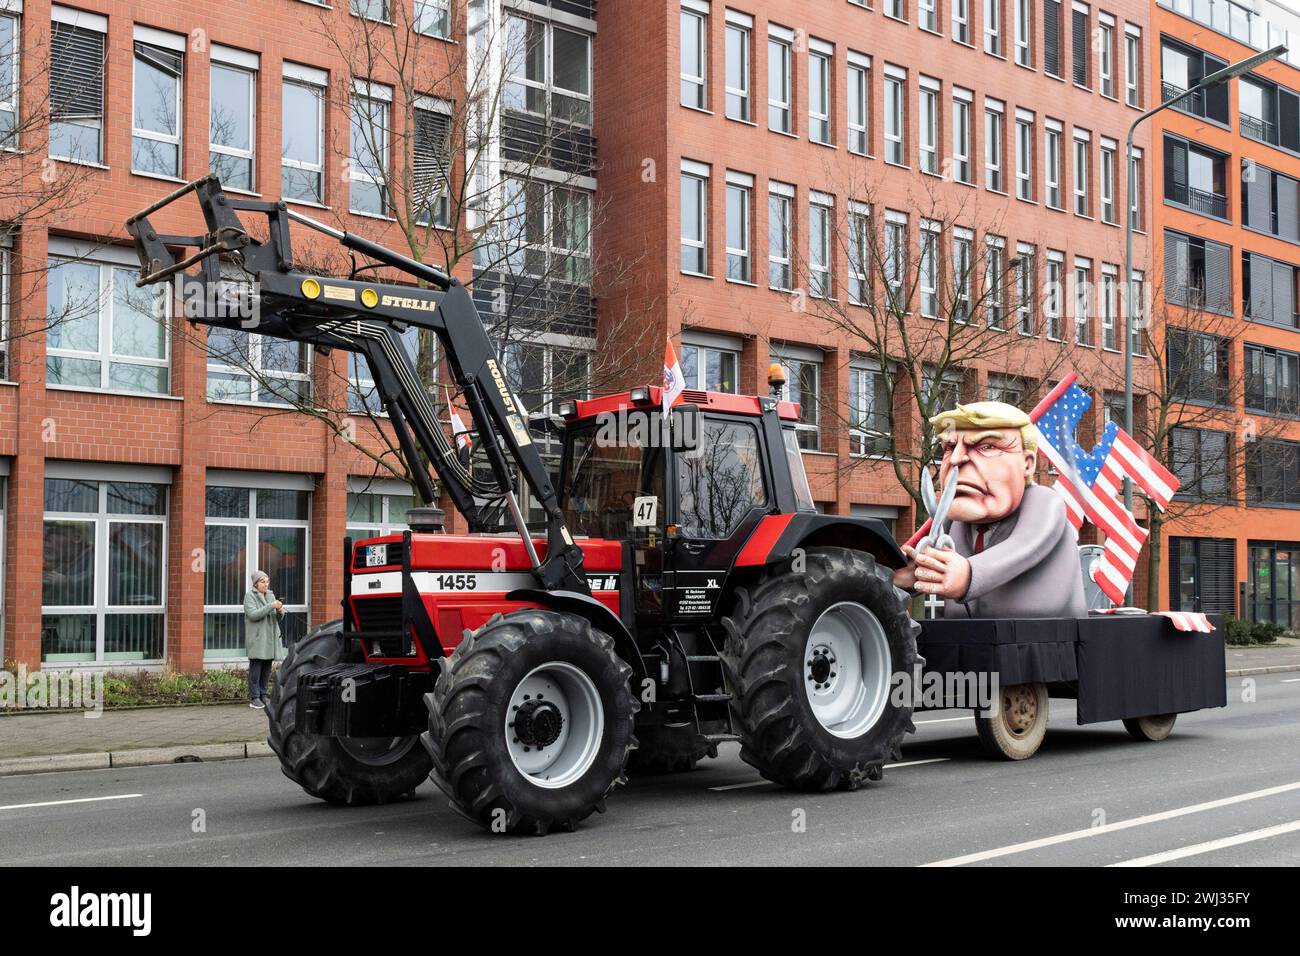 Rose Monday carnival parade in Düsseldorf. Float designed by Jacques Tilly. Depicting former US-president Donald Trump holding a swastika made of the stars and stripes. Stock Photo